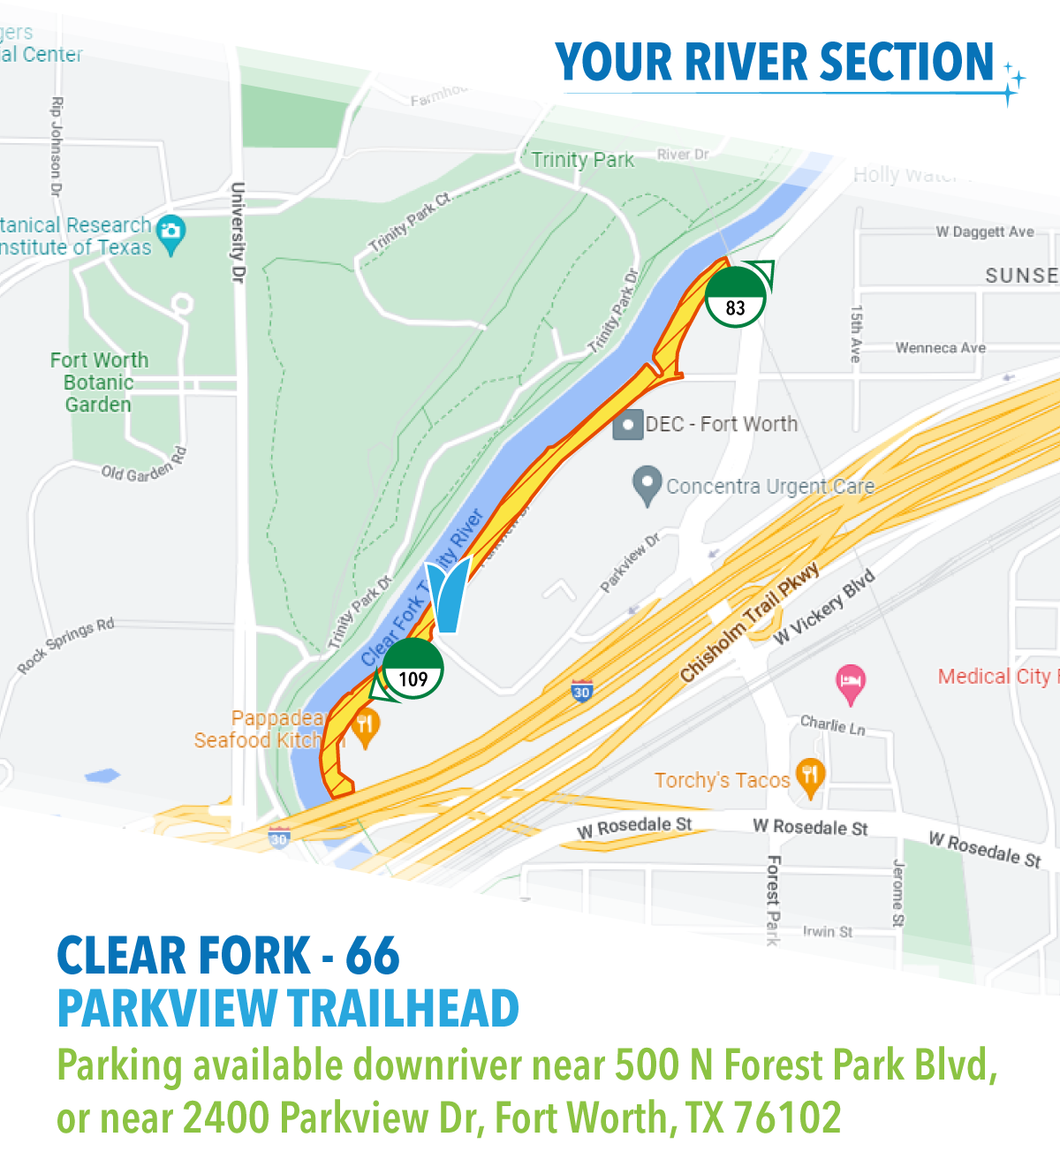 Section 66 – Parkview Trailhead